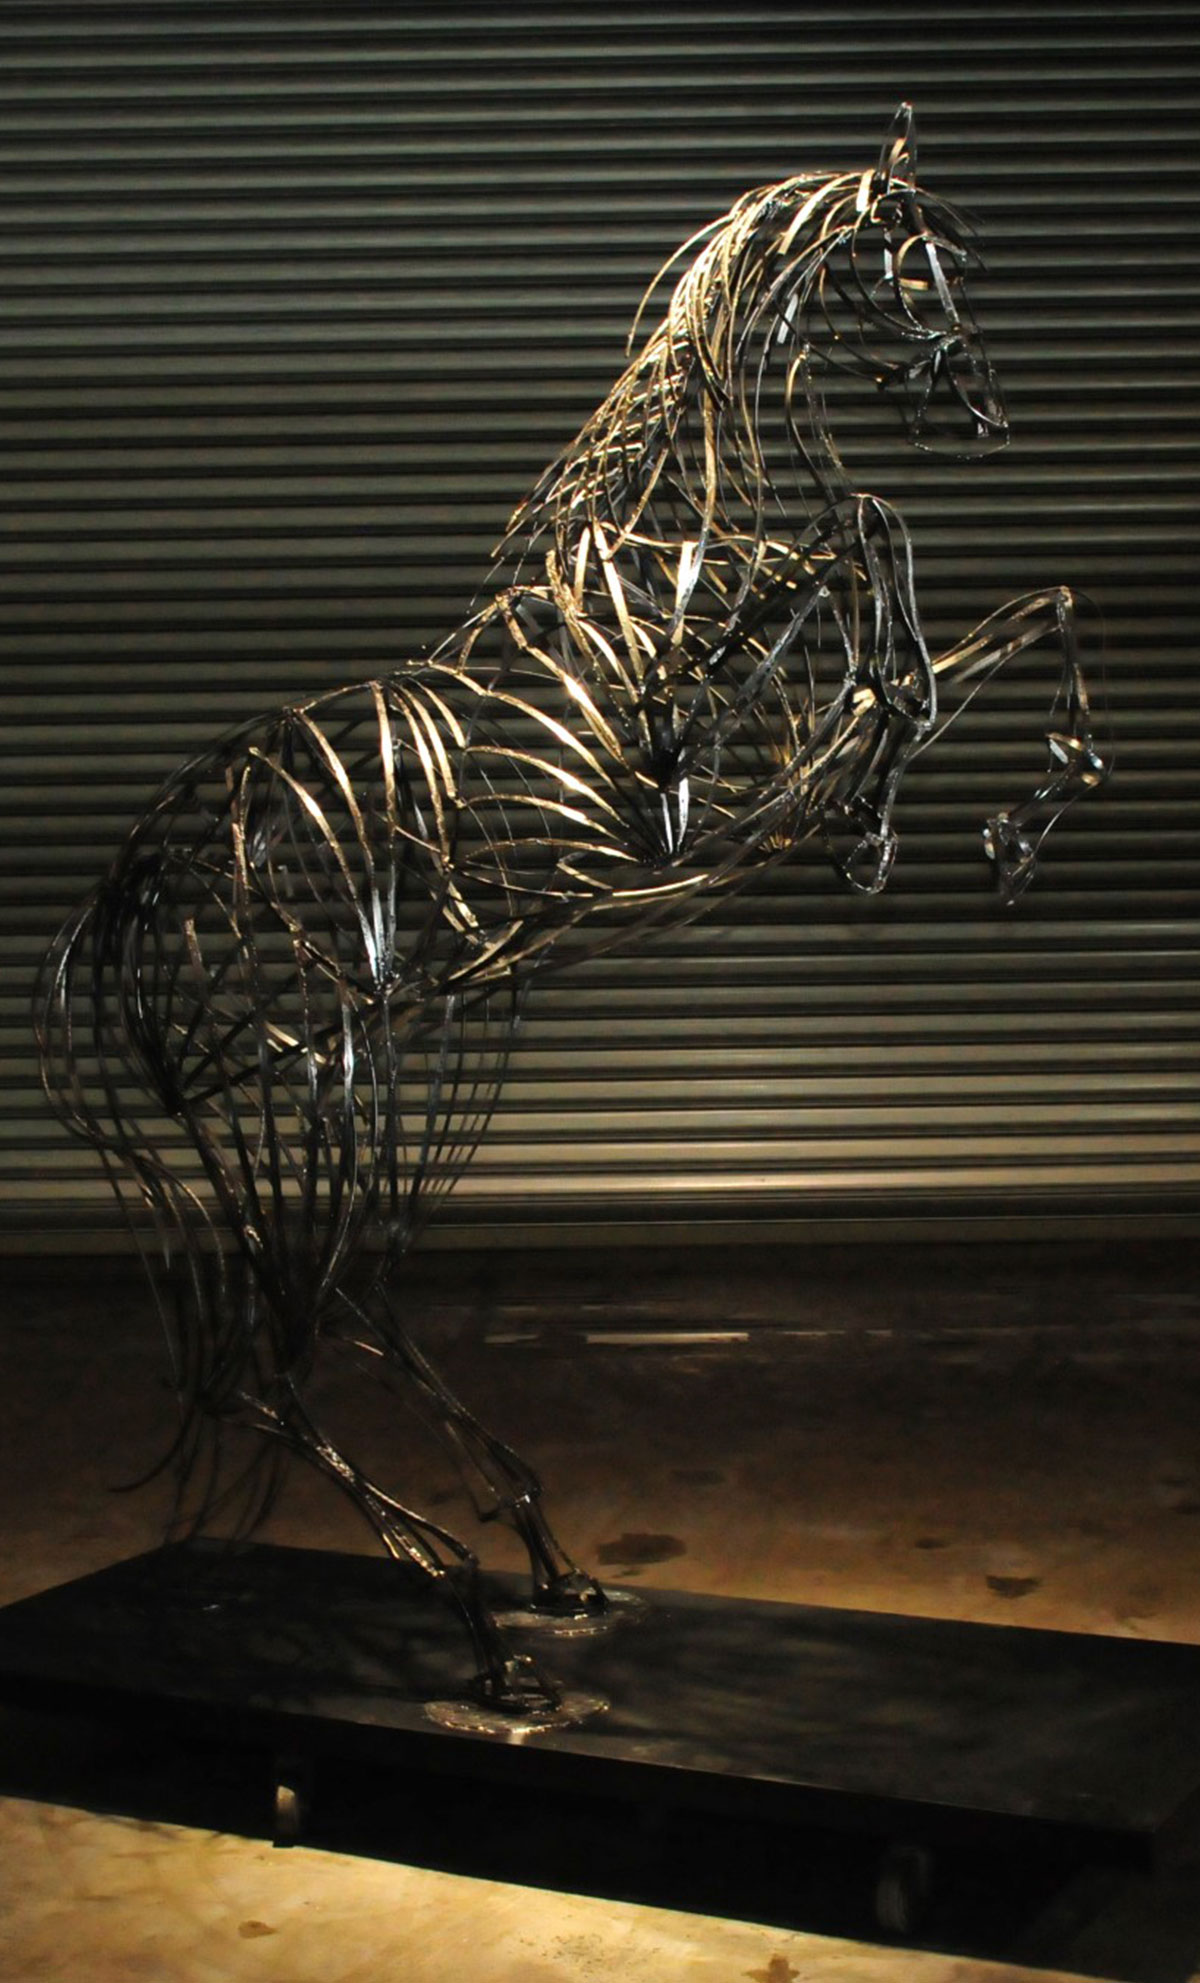 A steel line sculpture of a horse called ‘Gallop’ on its two hind legs in a rearing position.